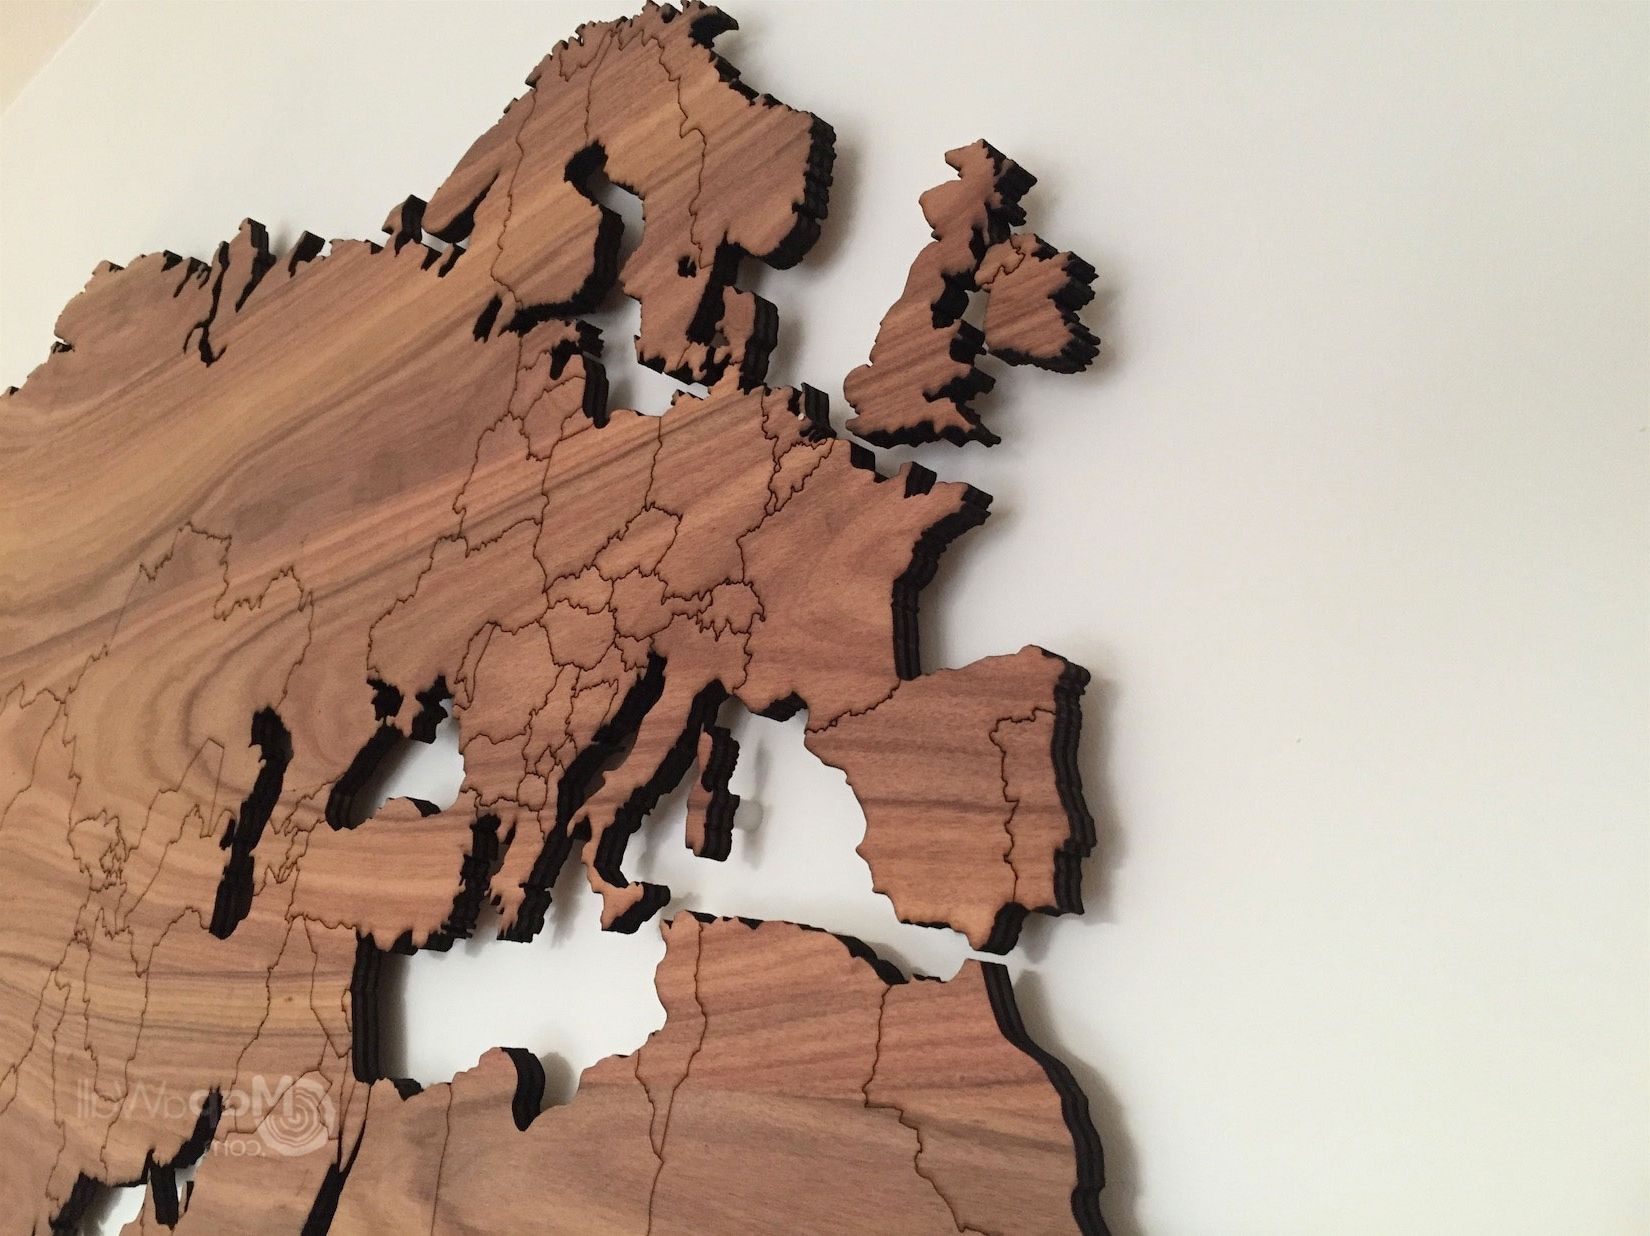 Most Current Wooden World Map Wall Art With Wall Art Designs: Wooden World Map Wall Art Wooden Wall Art Map Of (View 1 of 15)